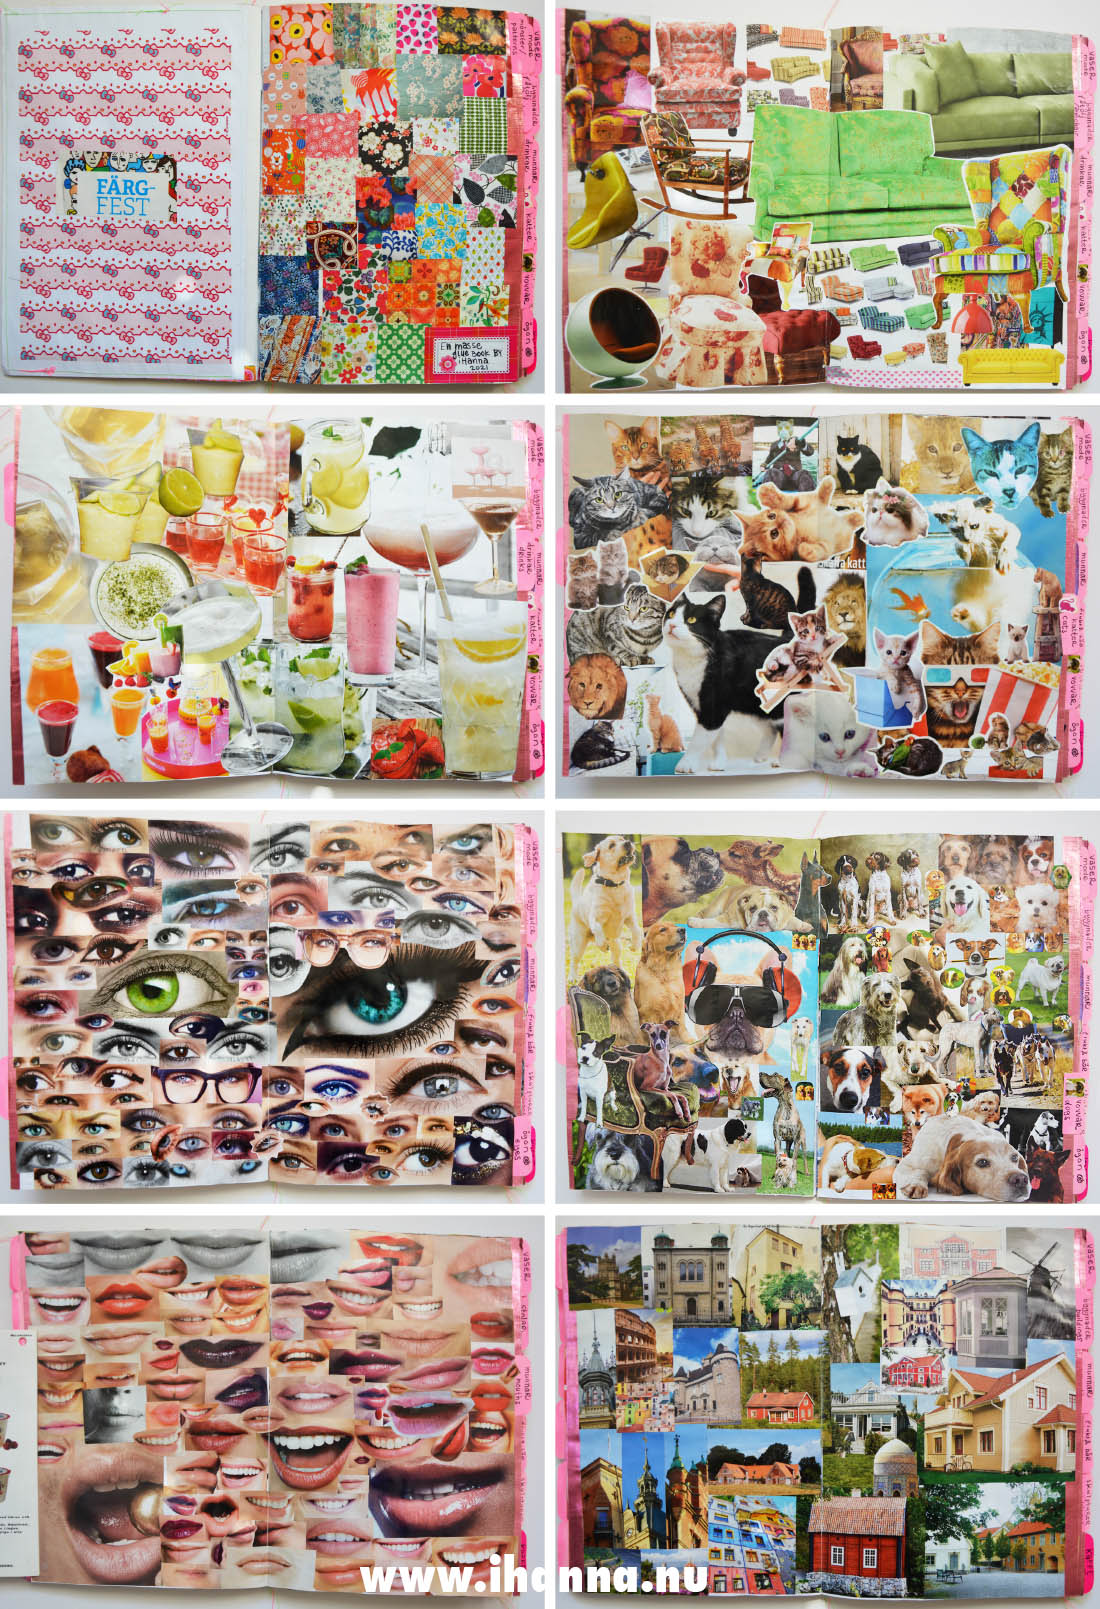 8 full spreads from iHannas En Masse Glue Book with magazine collage by Hanna Andersson